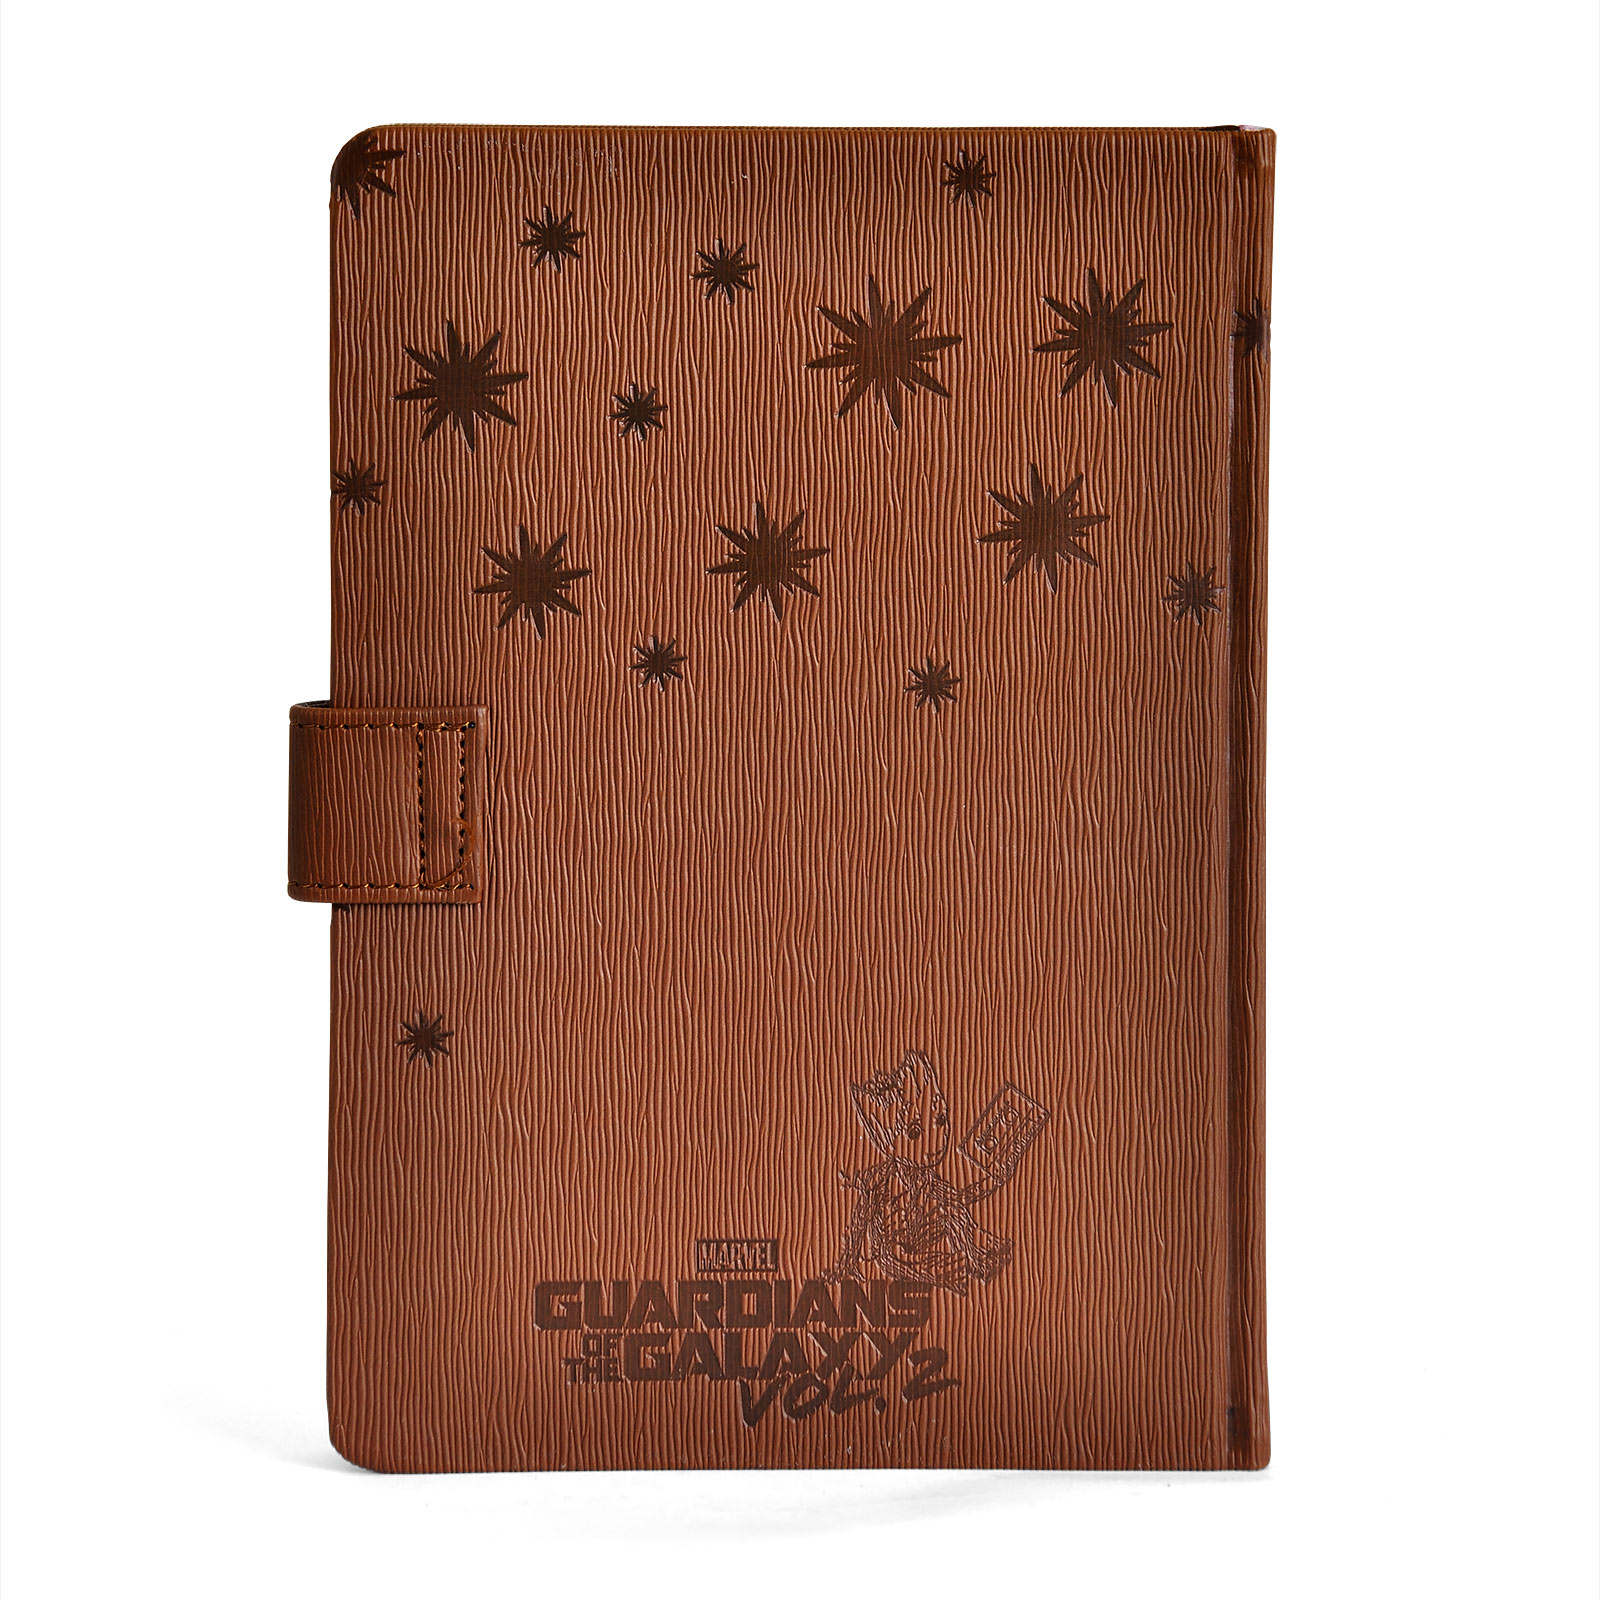 Guardians of the Galaxy - Groot Notebook with Sound